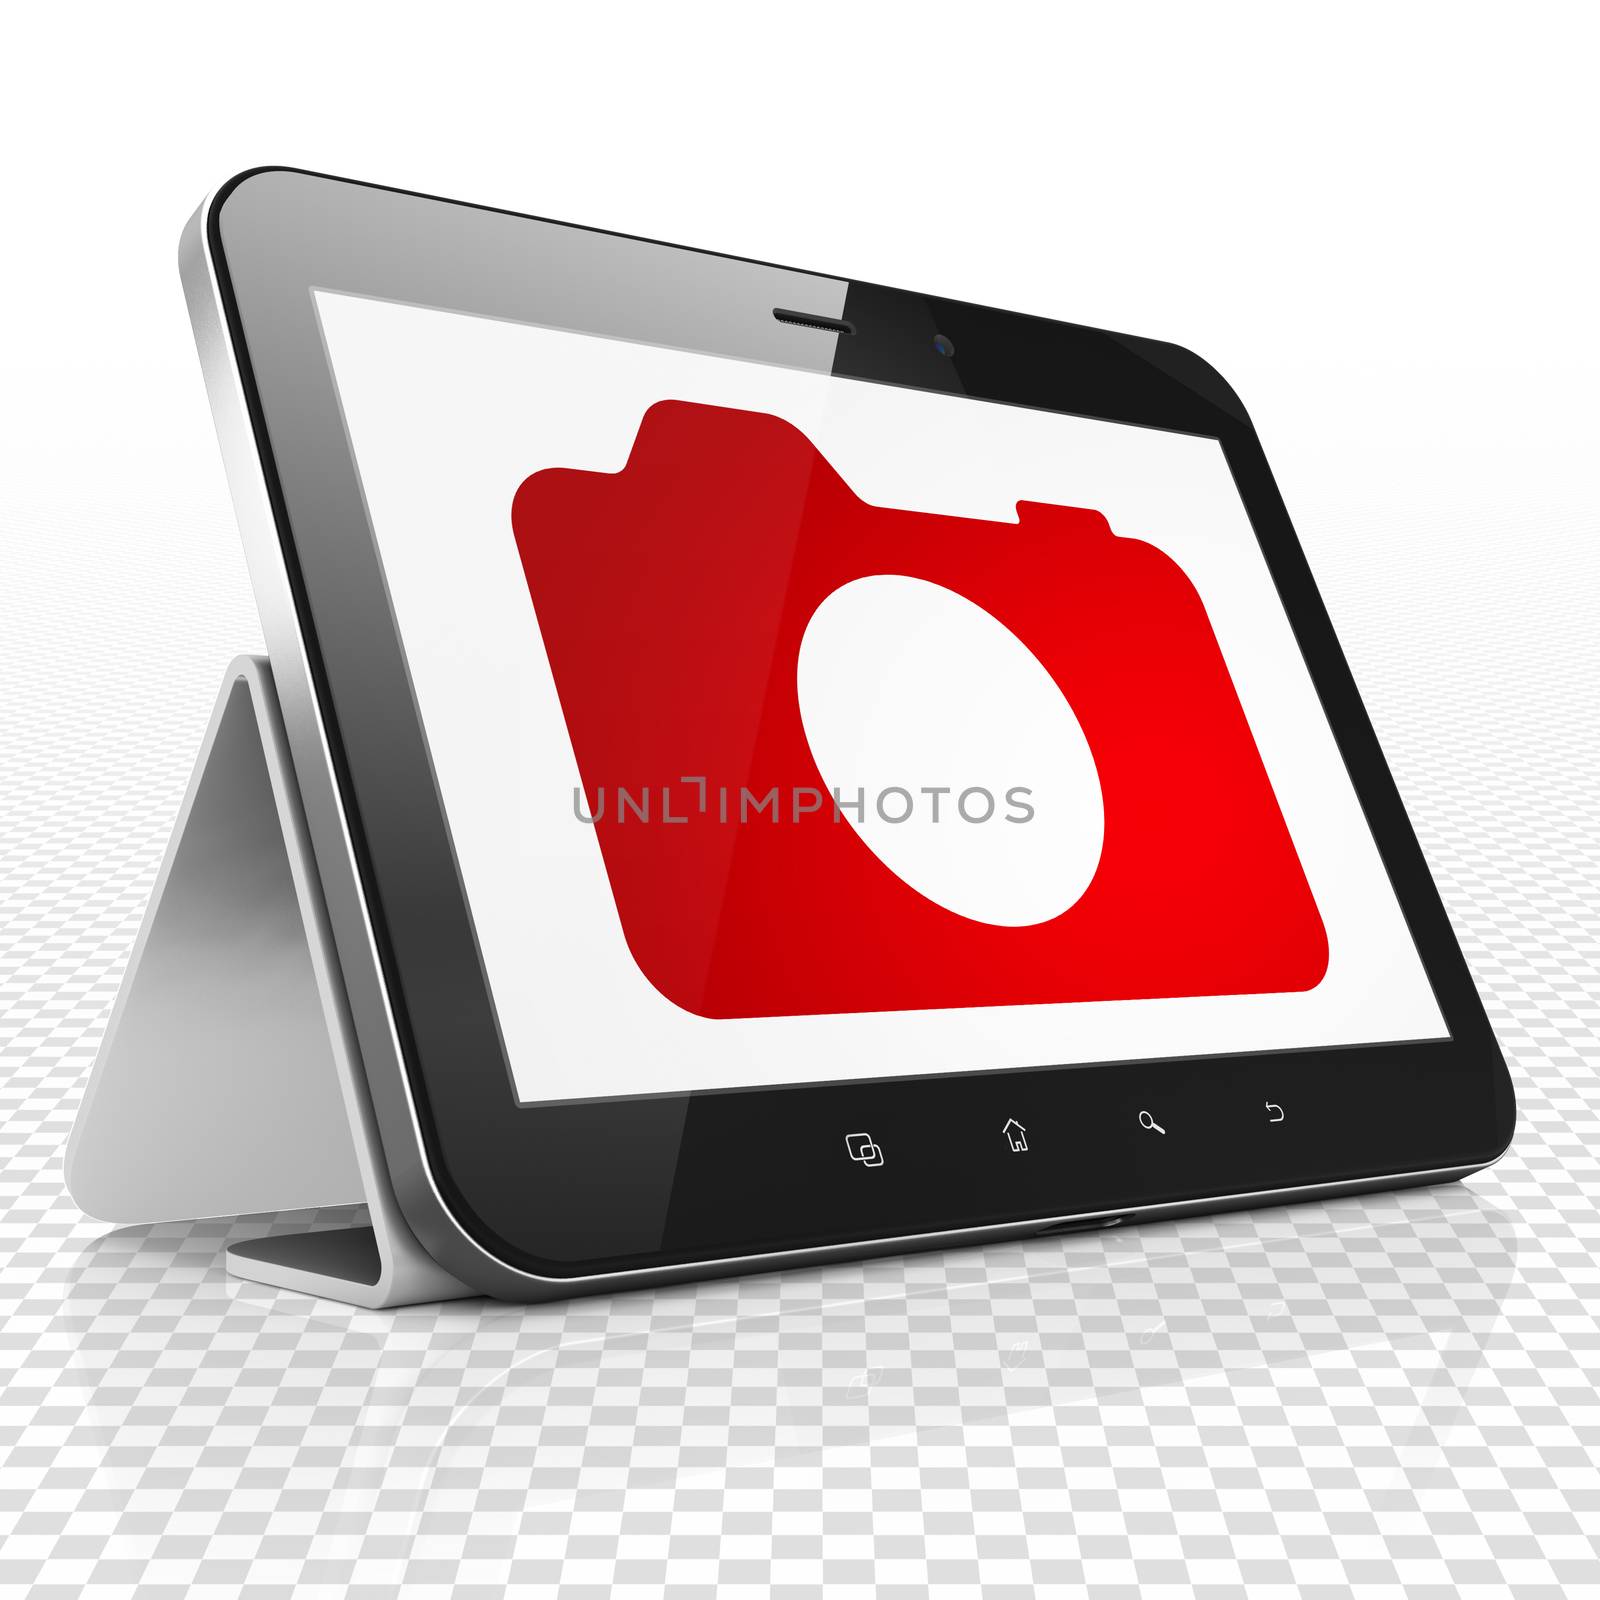 Vacation concept: Tablet Computer with red Photo Camera icon on display, 3D rendering